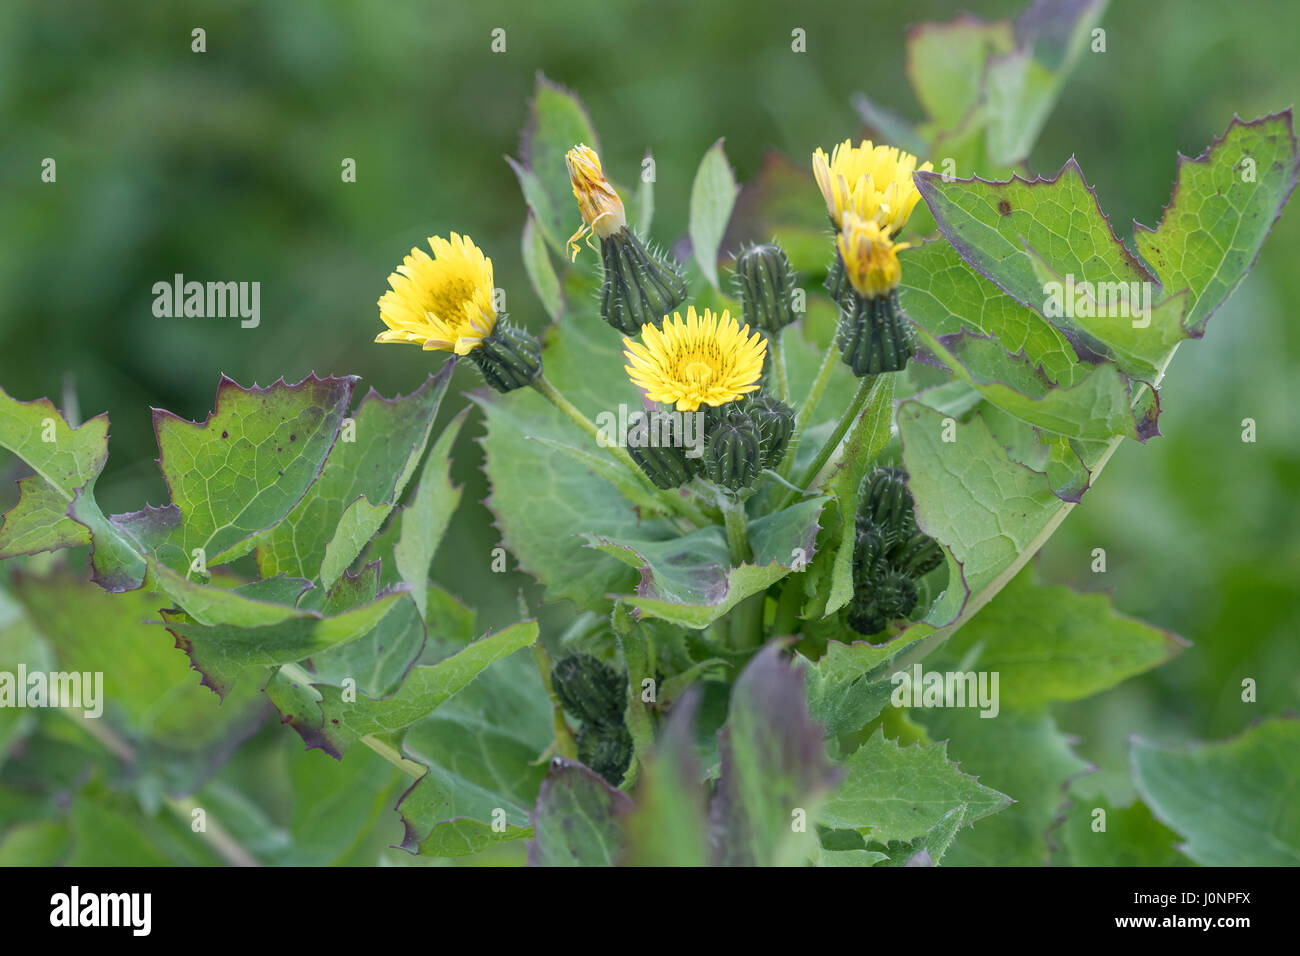 Yellow-flowered Smooth Sow-thistle / Sonchus oleraceus is a member of the daisy family. Leaves eaten as foraged food . Wrongly called Milk-thistle. Stock Photo